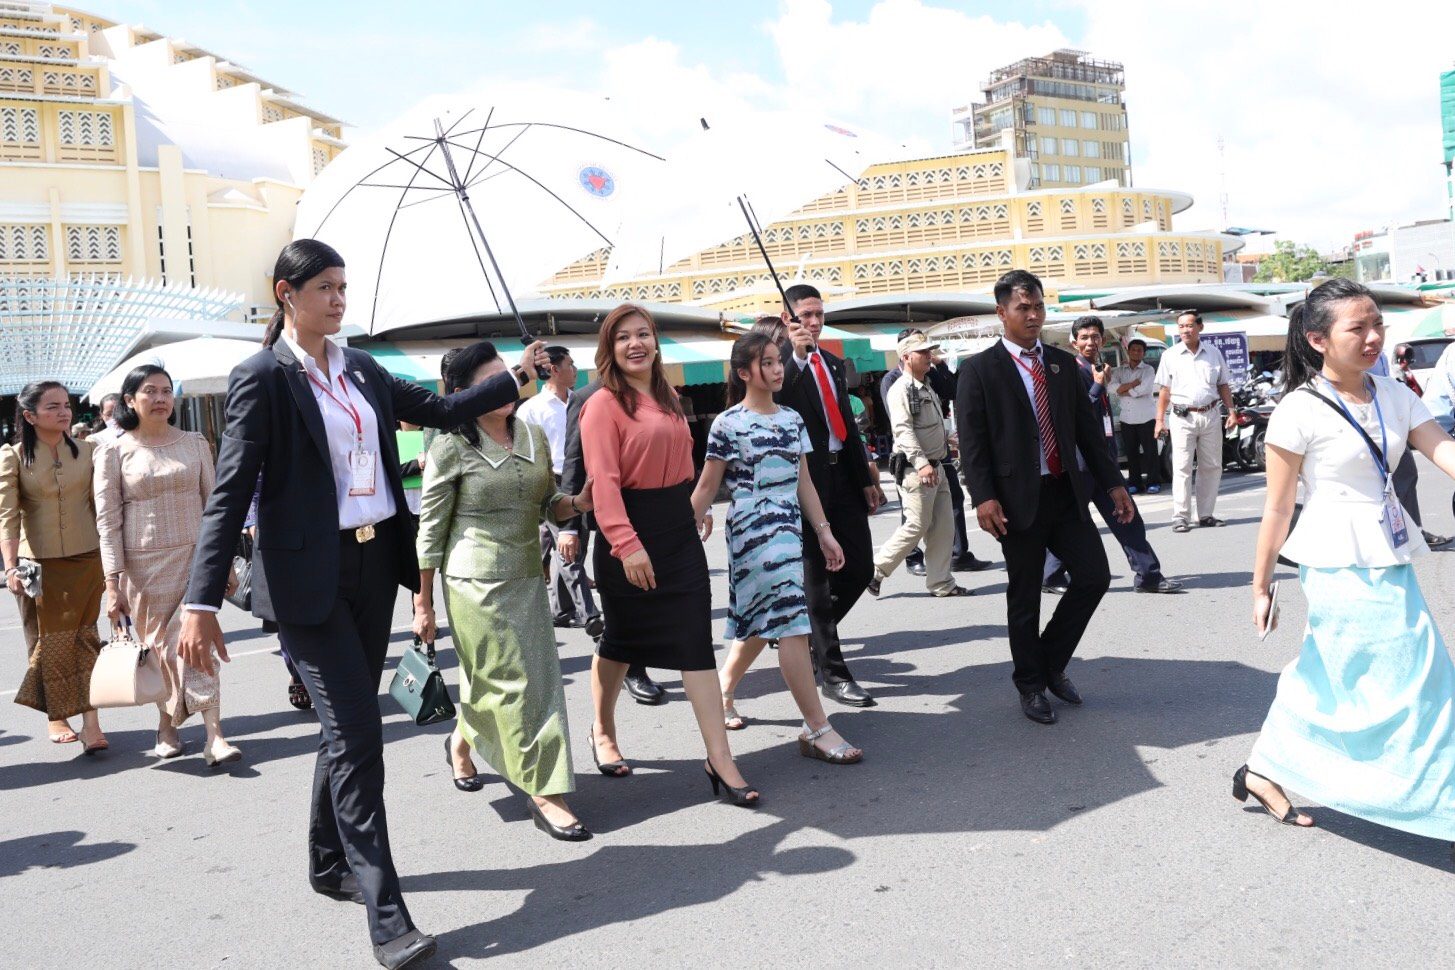 TOUR. While President Rodrigo Duterte attends the World Economic Forum, Honeylet and Kitty go sight-seeing and visit a hospital. Presidential photo 